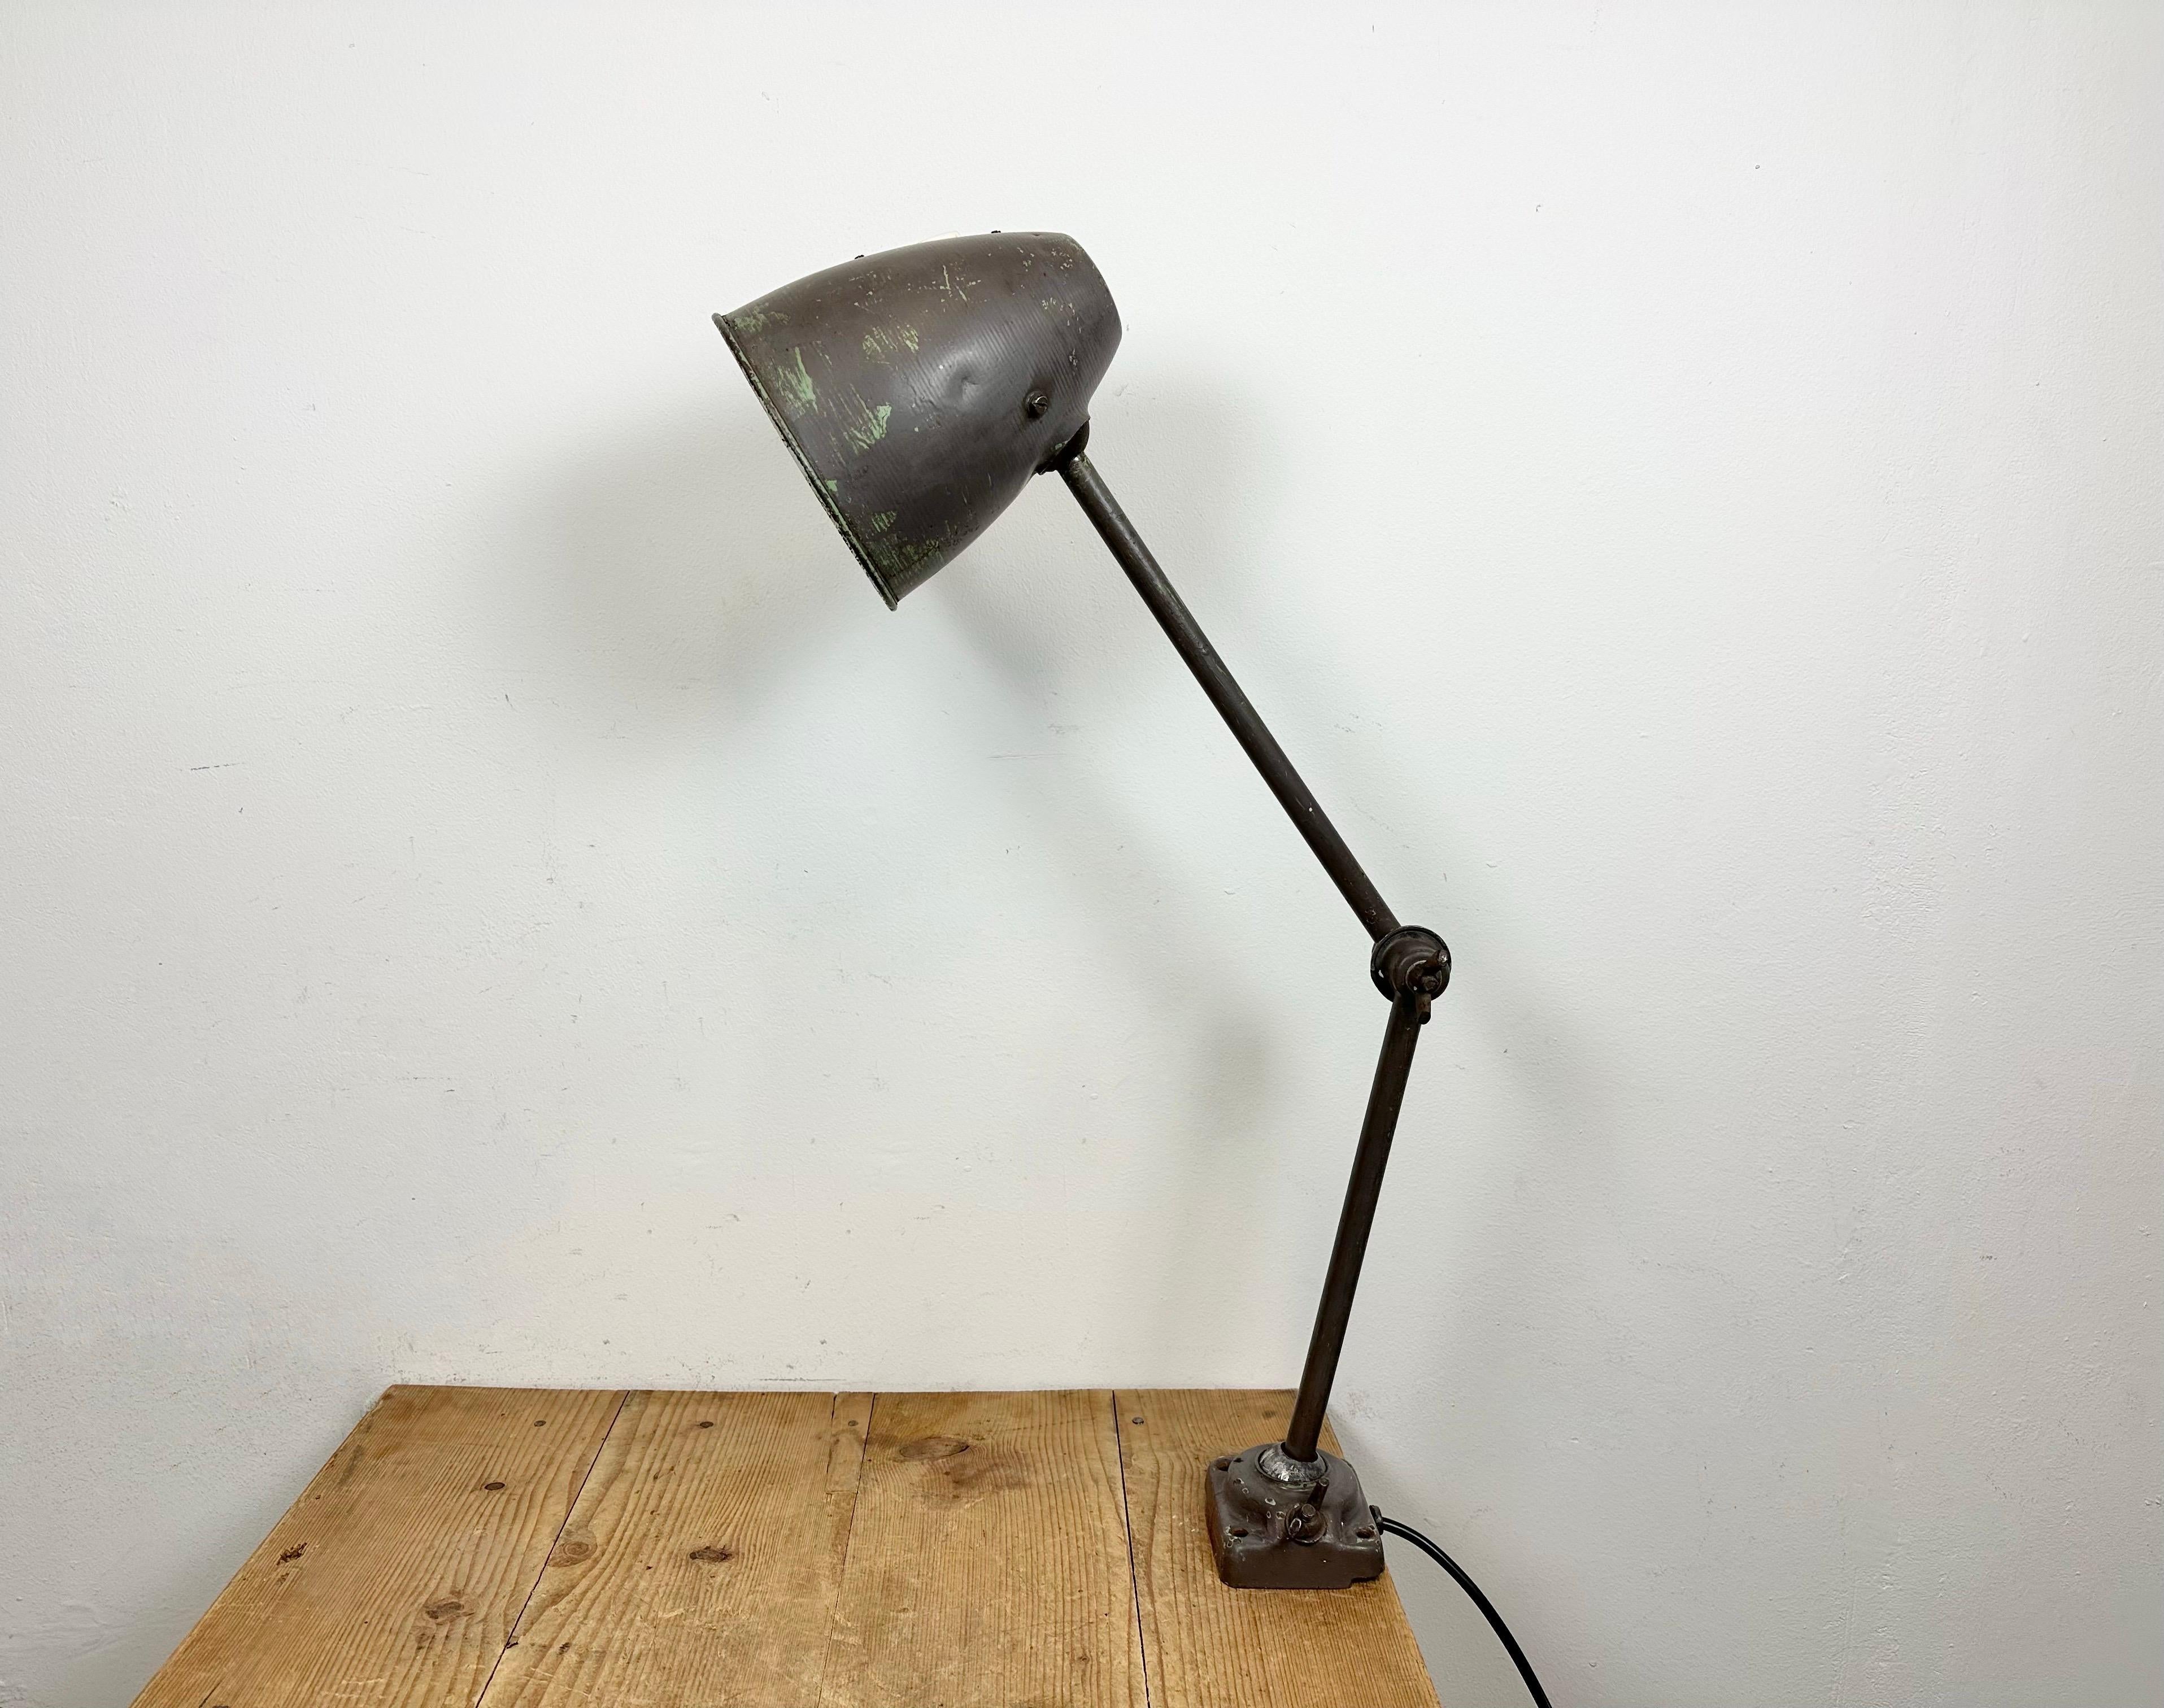 This brown industrial desk lamp was made in former Czechoslovakia during the 1960s. It features an iron body with three adjustable joints. The porcelain socket reqiures standard E 27/ E26 light bulbs. New wire. The switch is situated directly on the